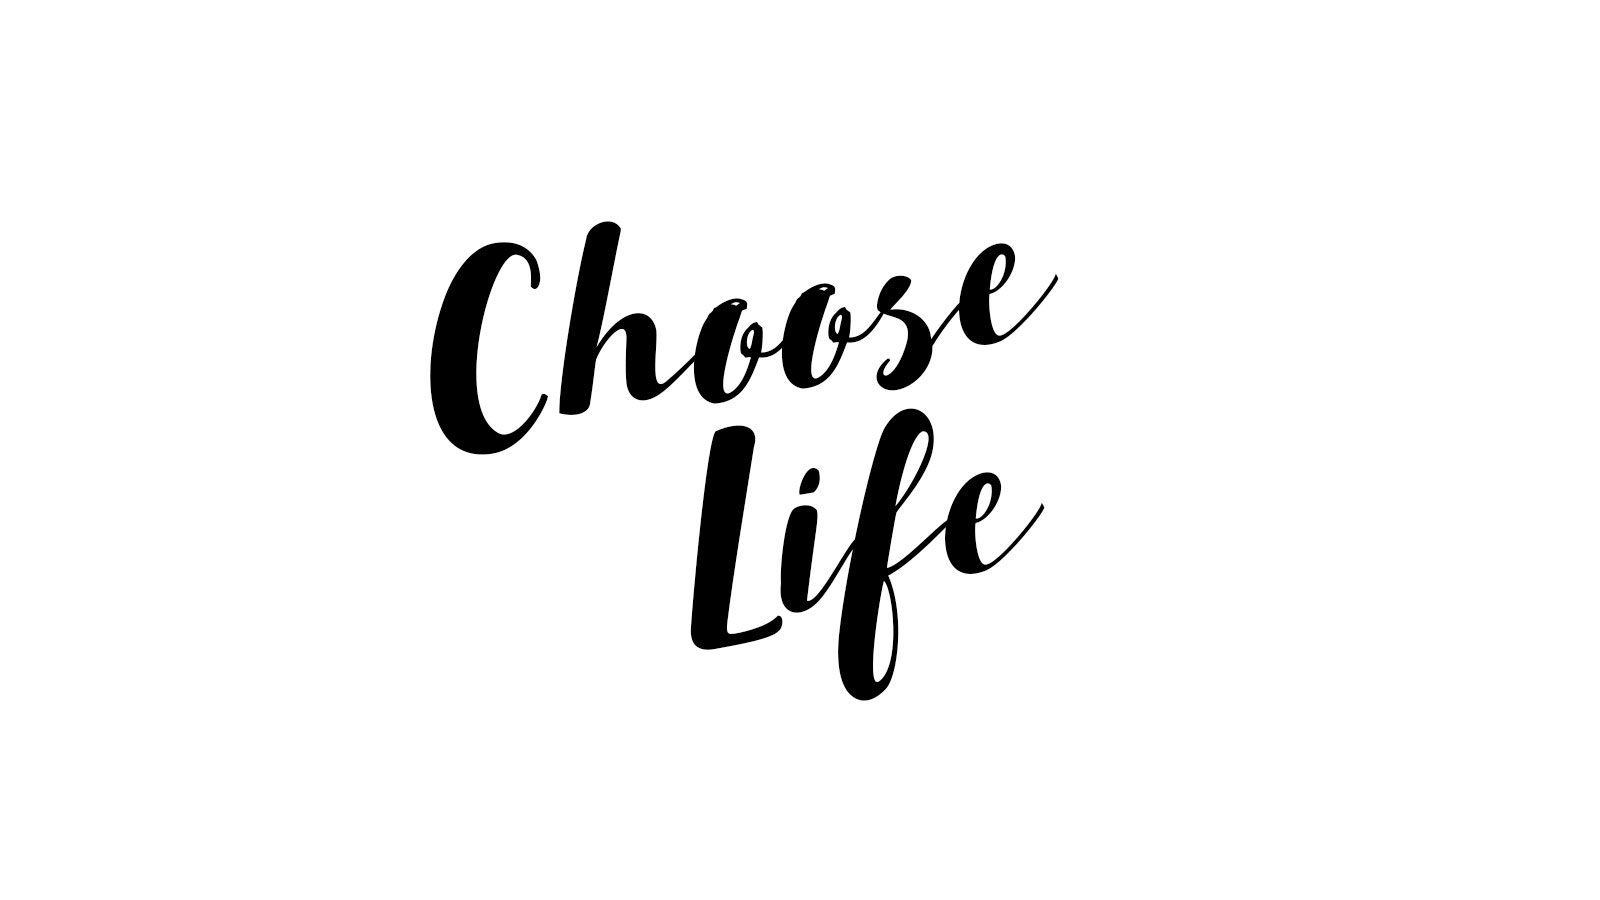 You can choose life